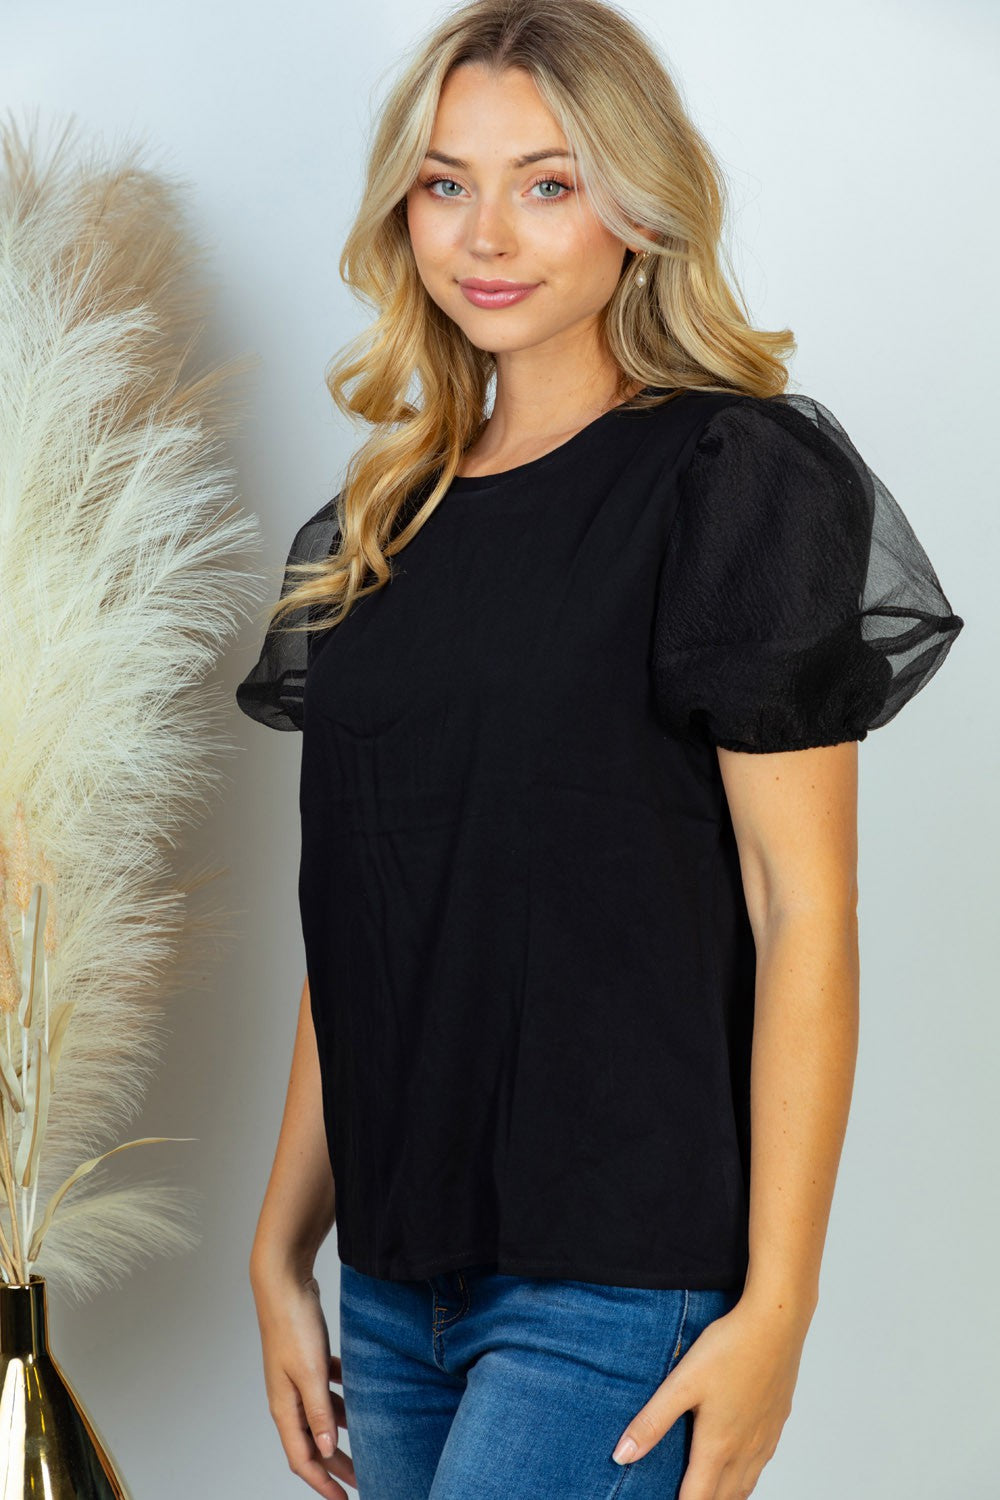 White Birch Slay the Day Away Top - Black, short organza puff sleeves, rounded neck, curvy